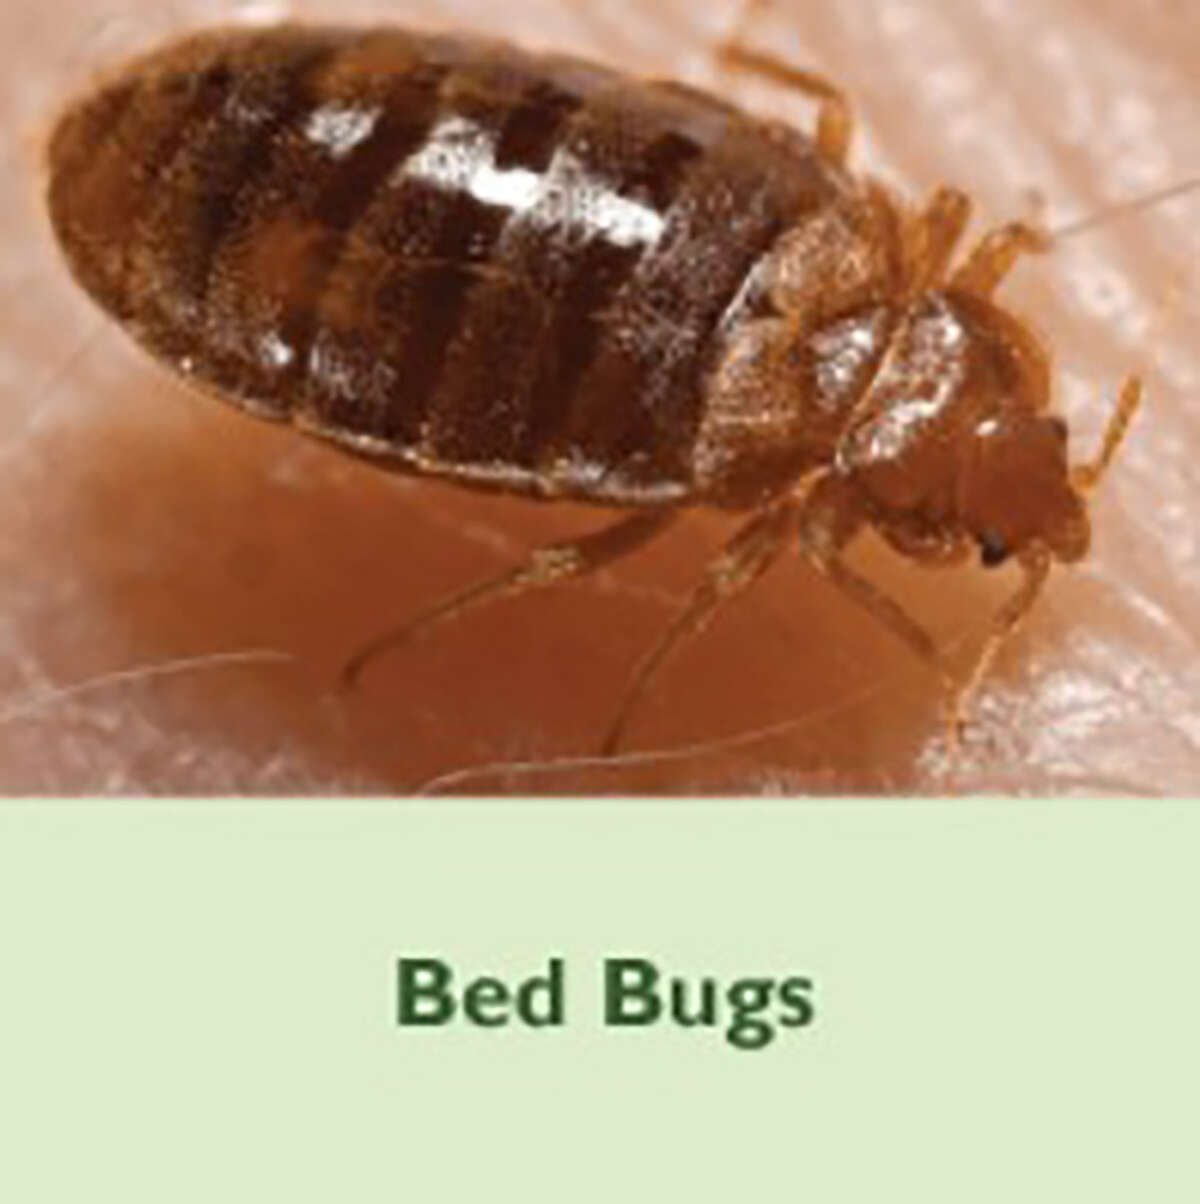 According to the michgan.gov website, "Bed bugs are small, flat insects that feed on the blood of people and animals when they sleep.  Bed bugs are experts at hiding.  Their slim flat bodies allow them to fit into the smallest of spaces and stay there for long periods of time, even without a blood meal." 